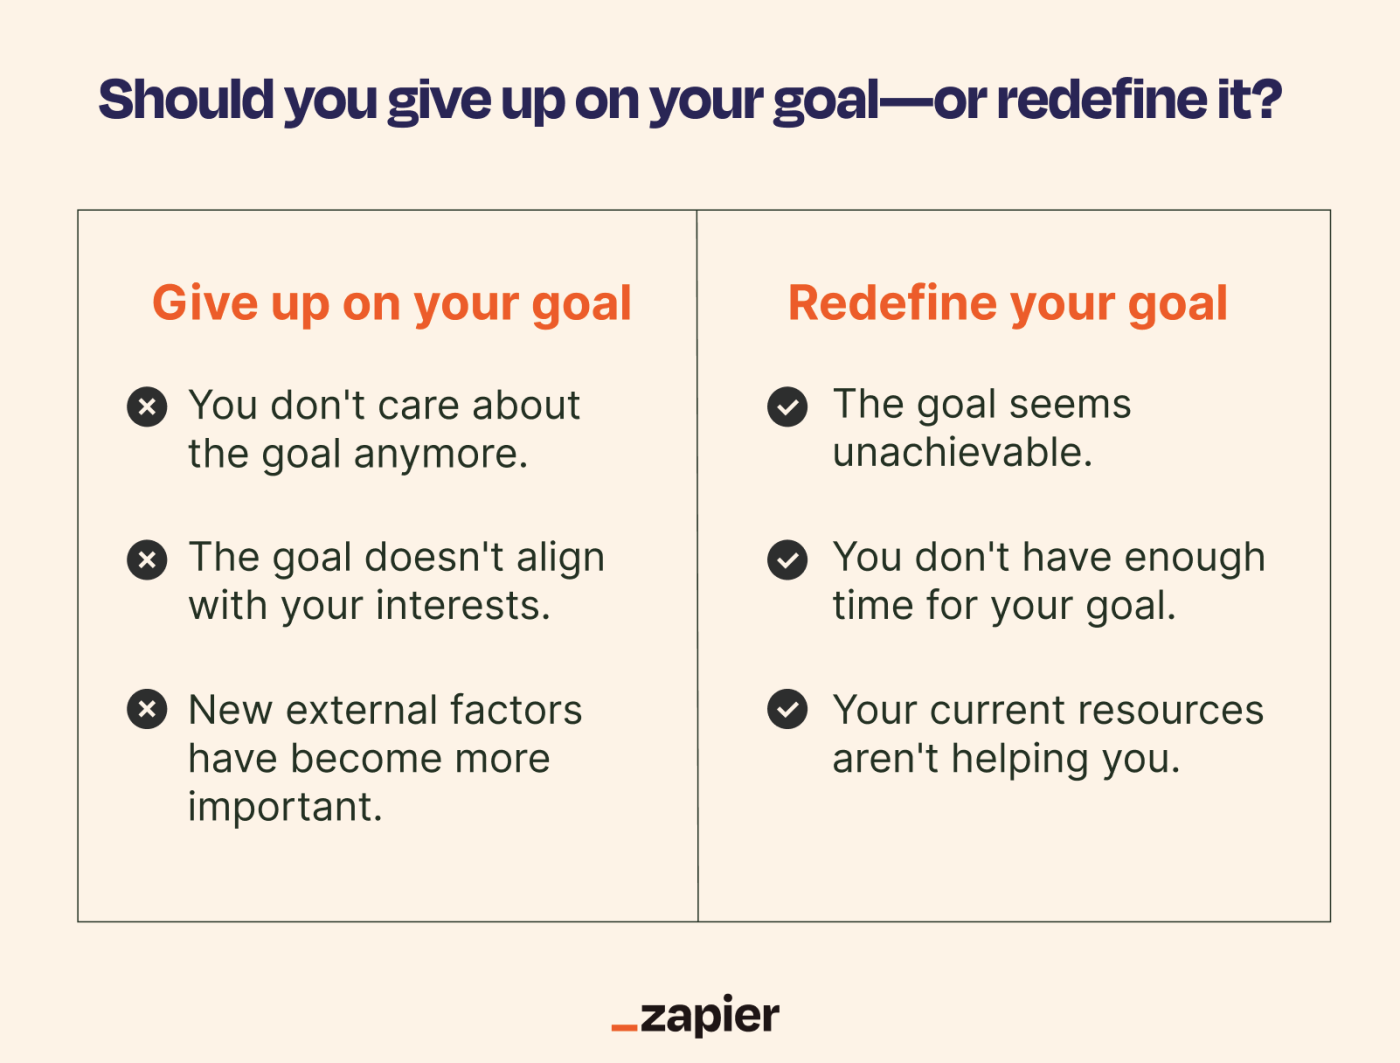 Infographic showing when to give up on a goal vs. redefine your goal. When to redefine a goal: The goal seems unachievable; You don't have enough time for your goal;  Your current resources aren't helping you. When to give up on a goal: You don't care about the goal anymore; The goal doesn't align with your interests; New external life factors have become more important. 